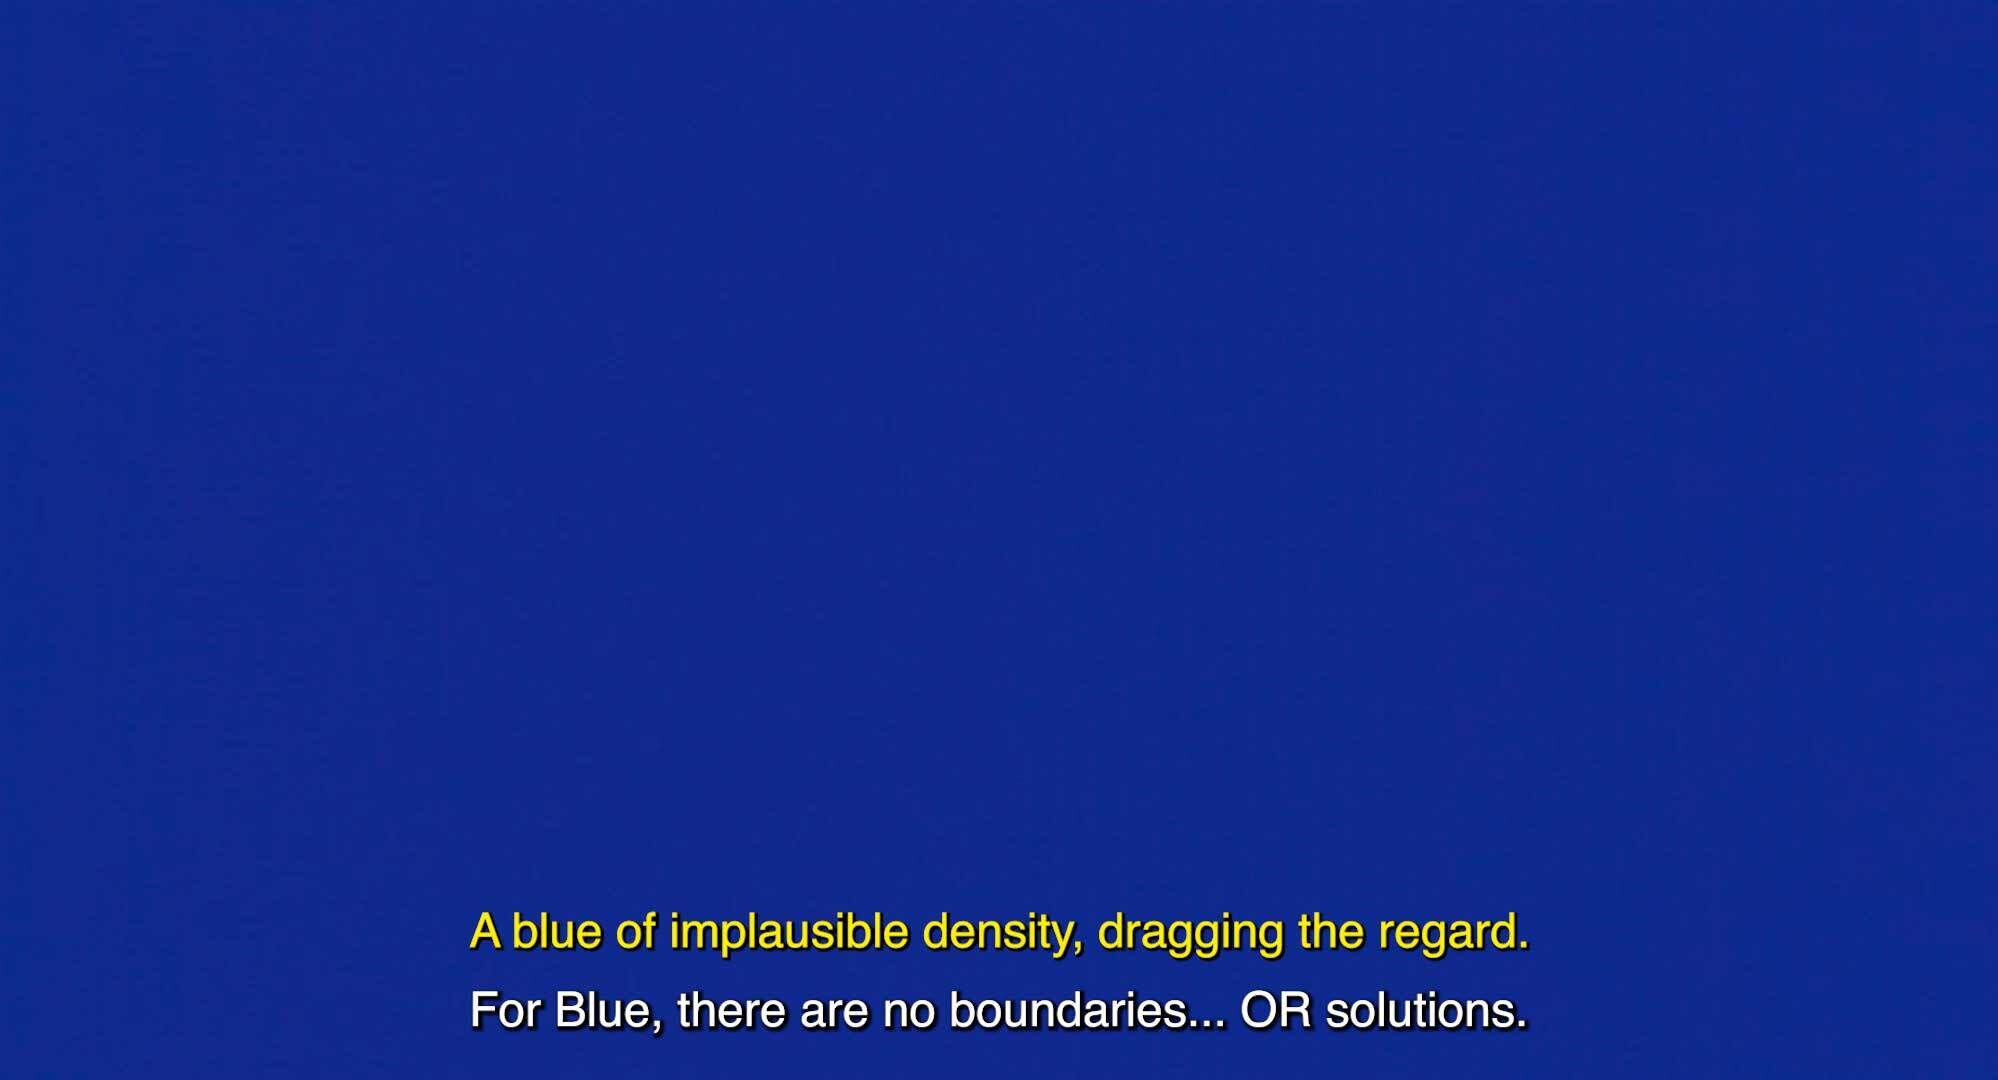 Solid blue background with yellow text at the bottom: "A blue of implausible density, dragging the regard. For Blue, there are no boundaries... OR solutions."